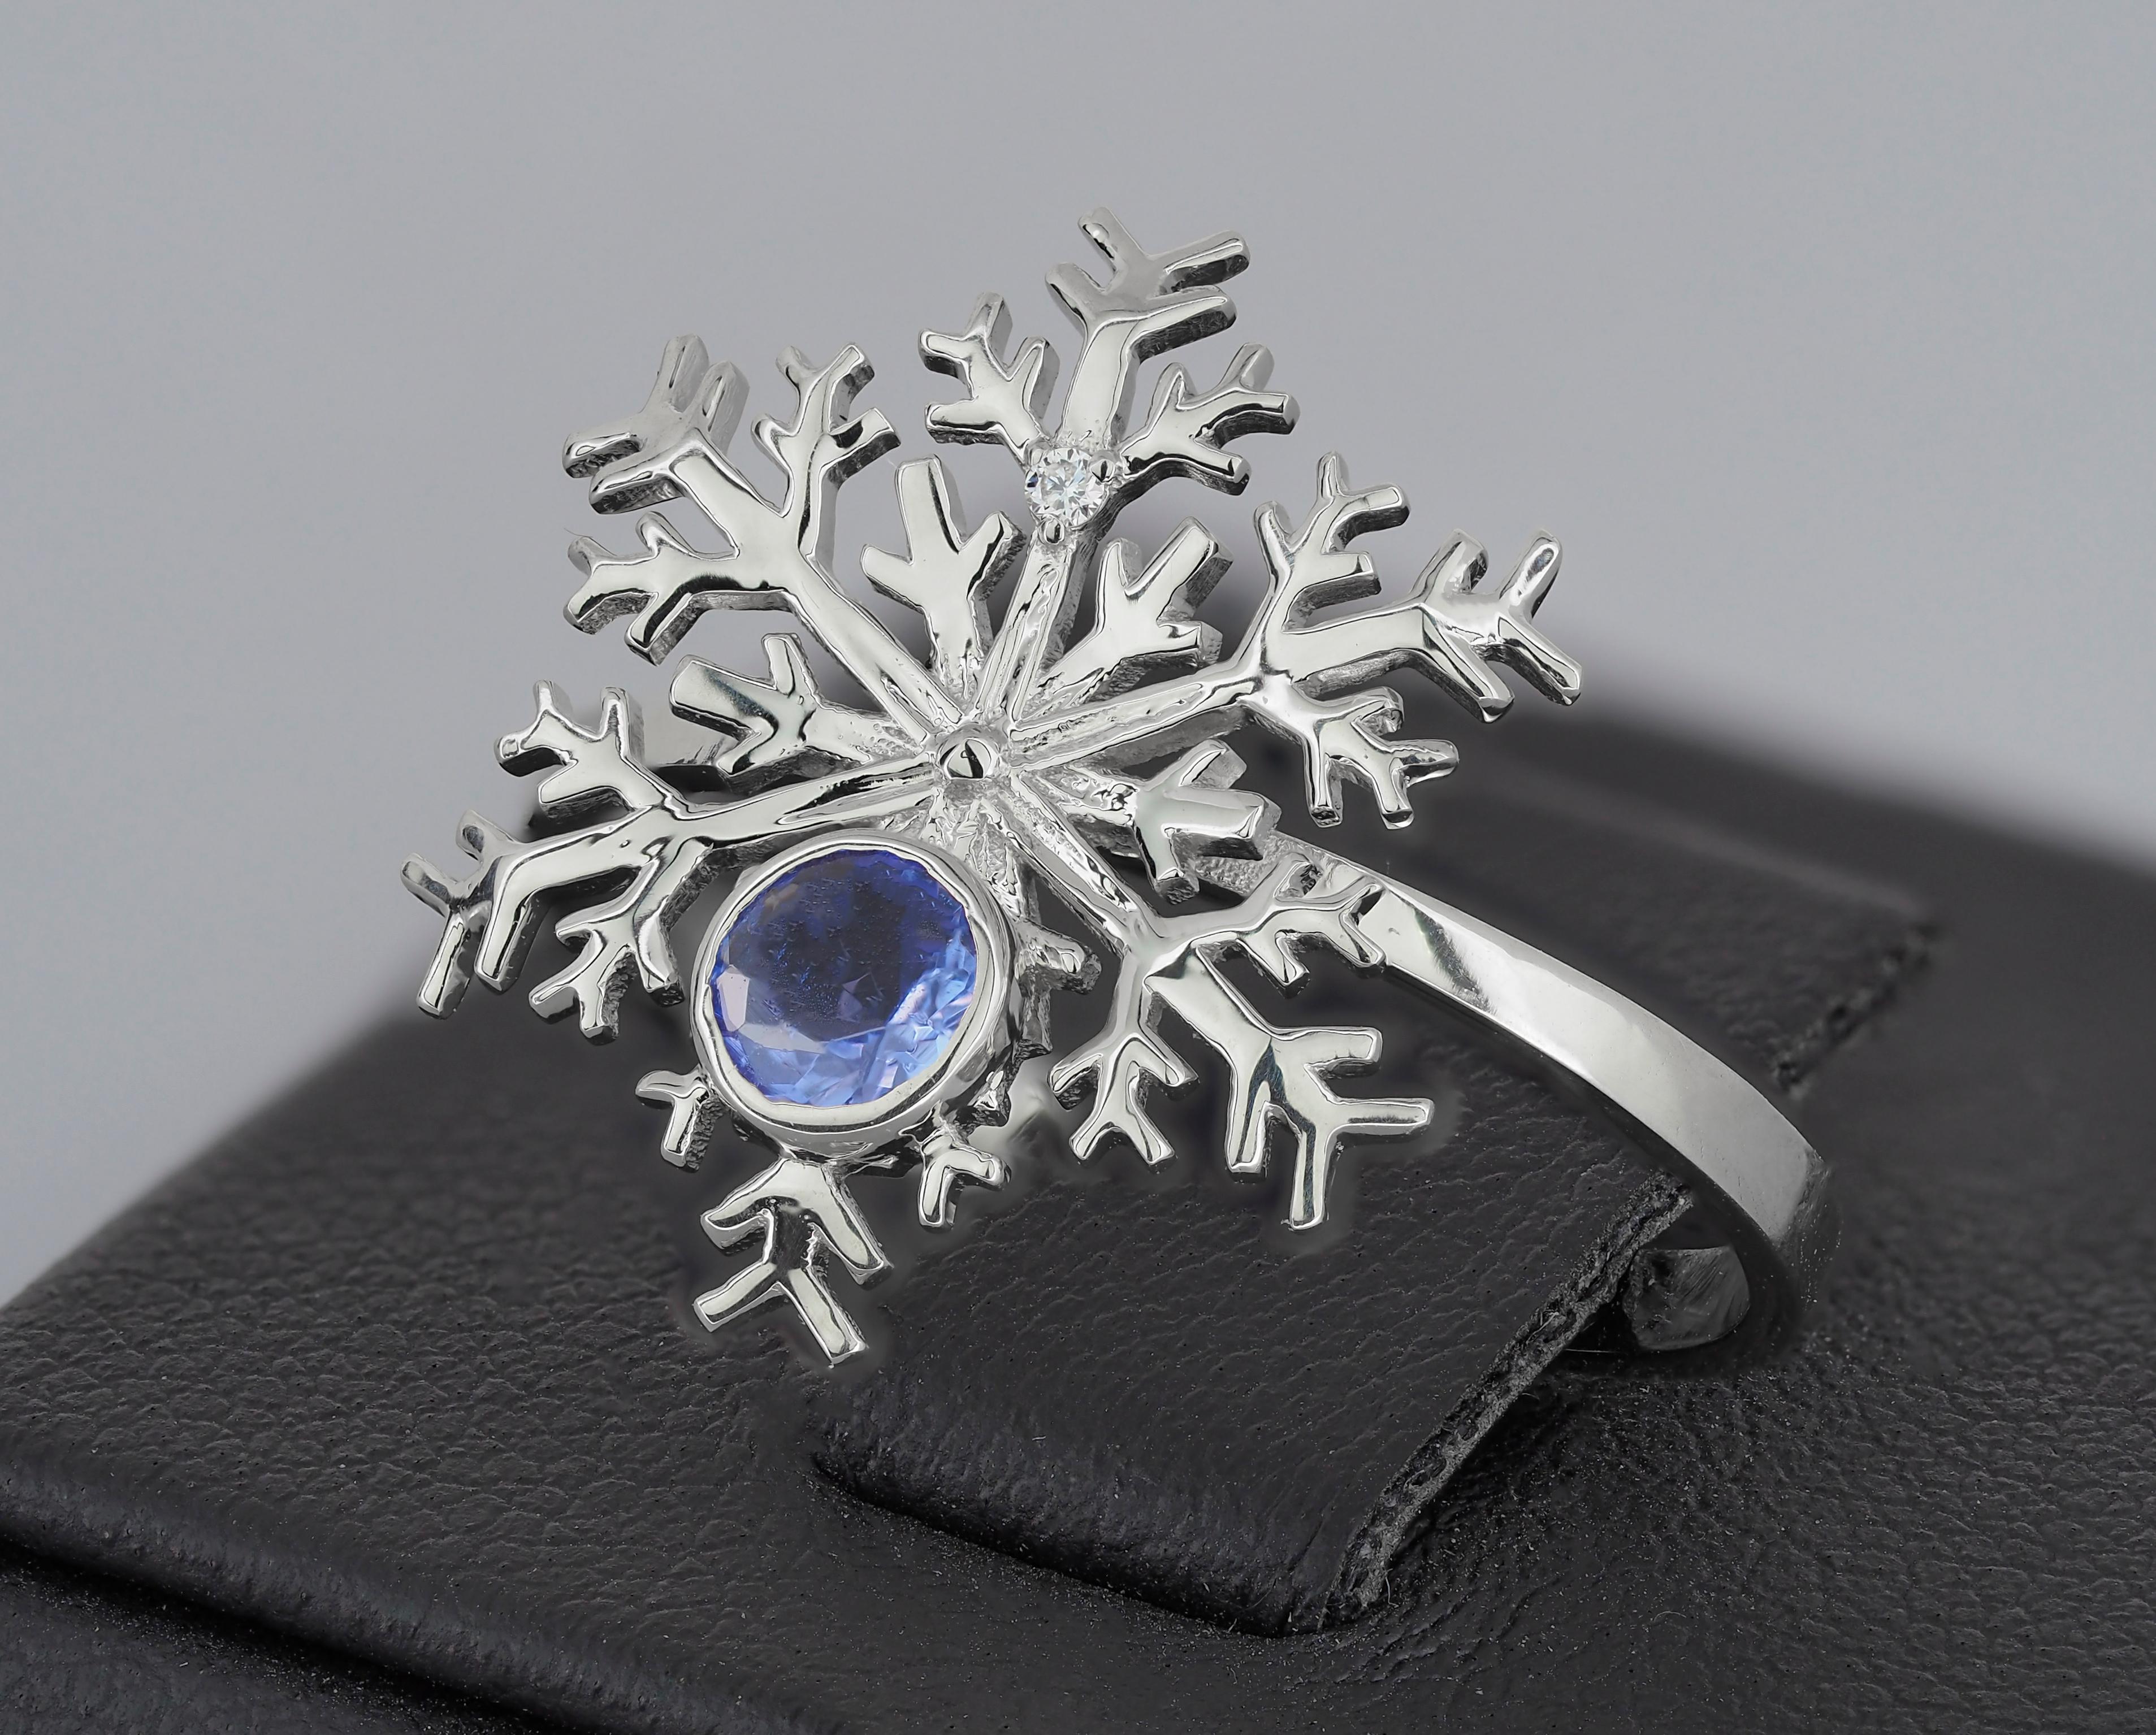 Snowflake 14kt solid gold ring with natural tanzanite and diamonds. December birthstone. Christmas jewelry. 
Tanzanite gold ring.
Weight: 1.85 g. - depends from size
Central stone: Natural tanzanite
Weight: approx 0.45 ct. in total, round